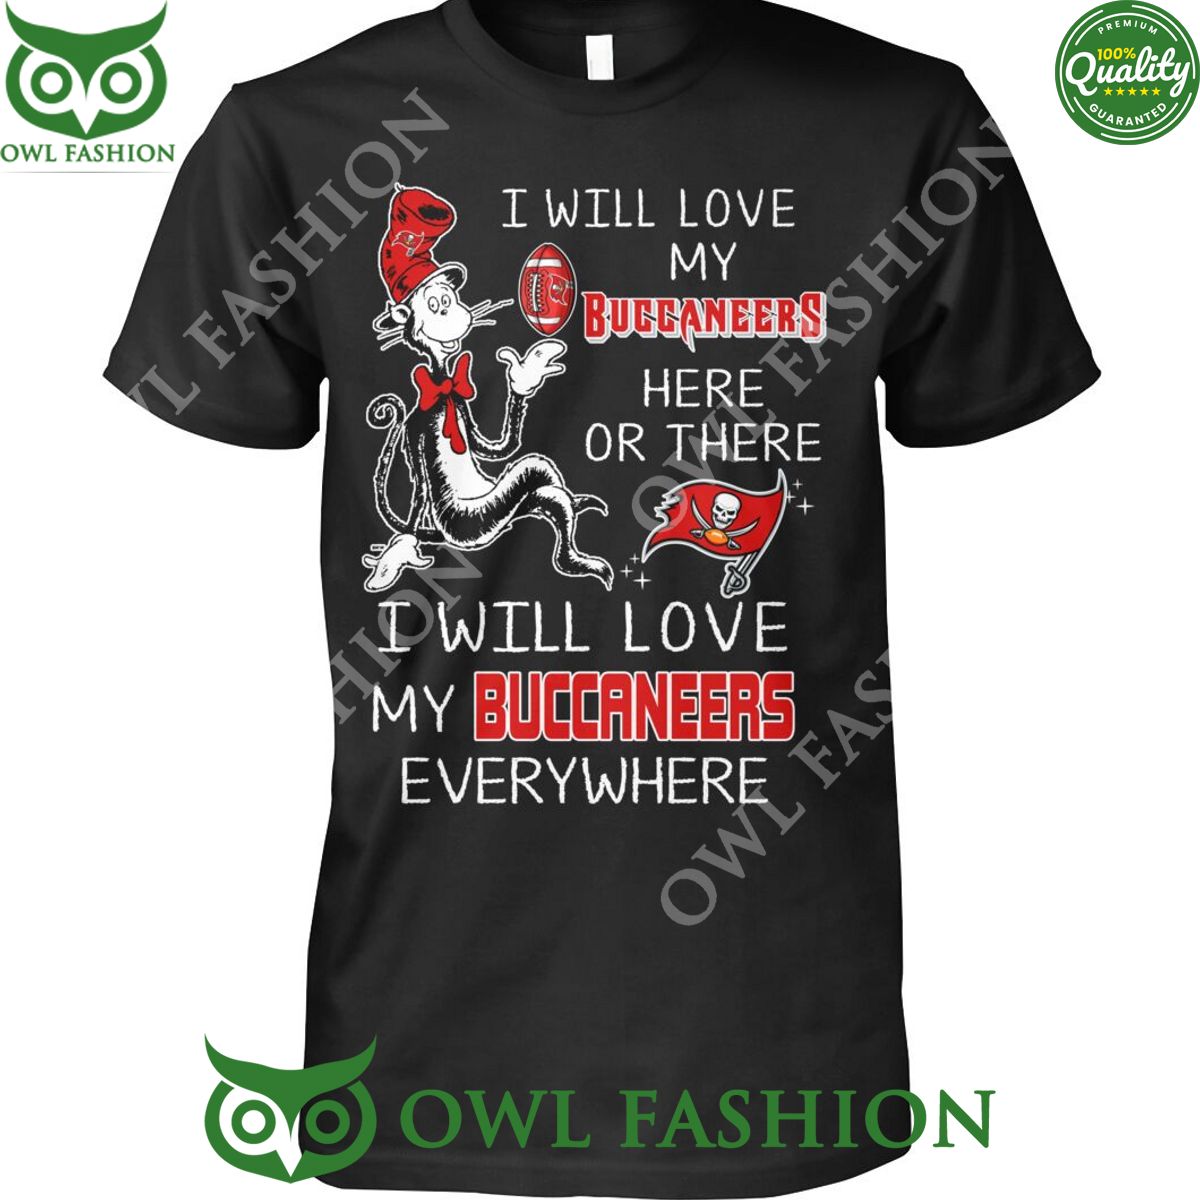 I will love my Buccaneers here or there or everywhere Tampa Bay NFL team t shirt